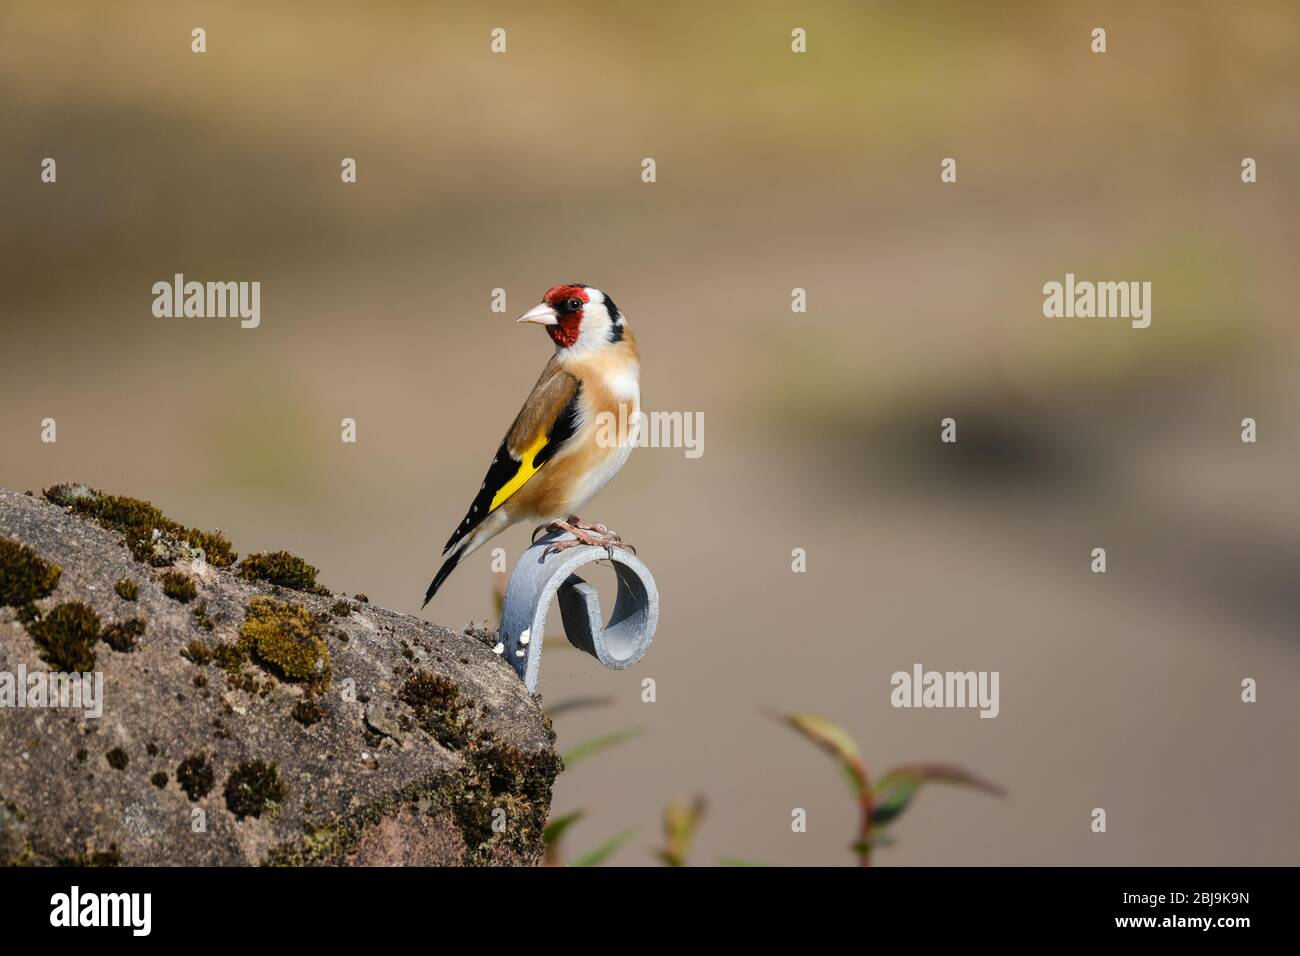 Goldfinch (Carduelis carduelis) is a delicate small finch that has a sandy brown body and distinctive yellow bar along its wings. Stock Photo